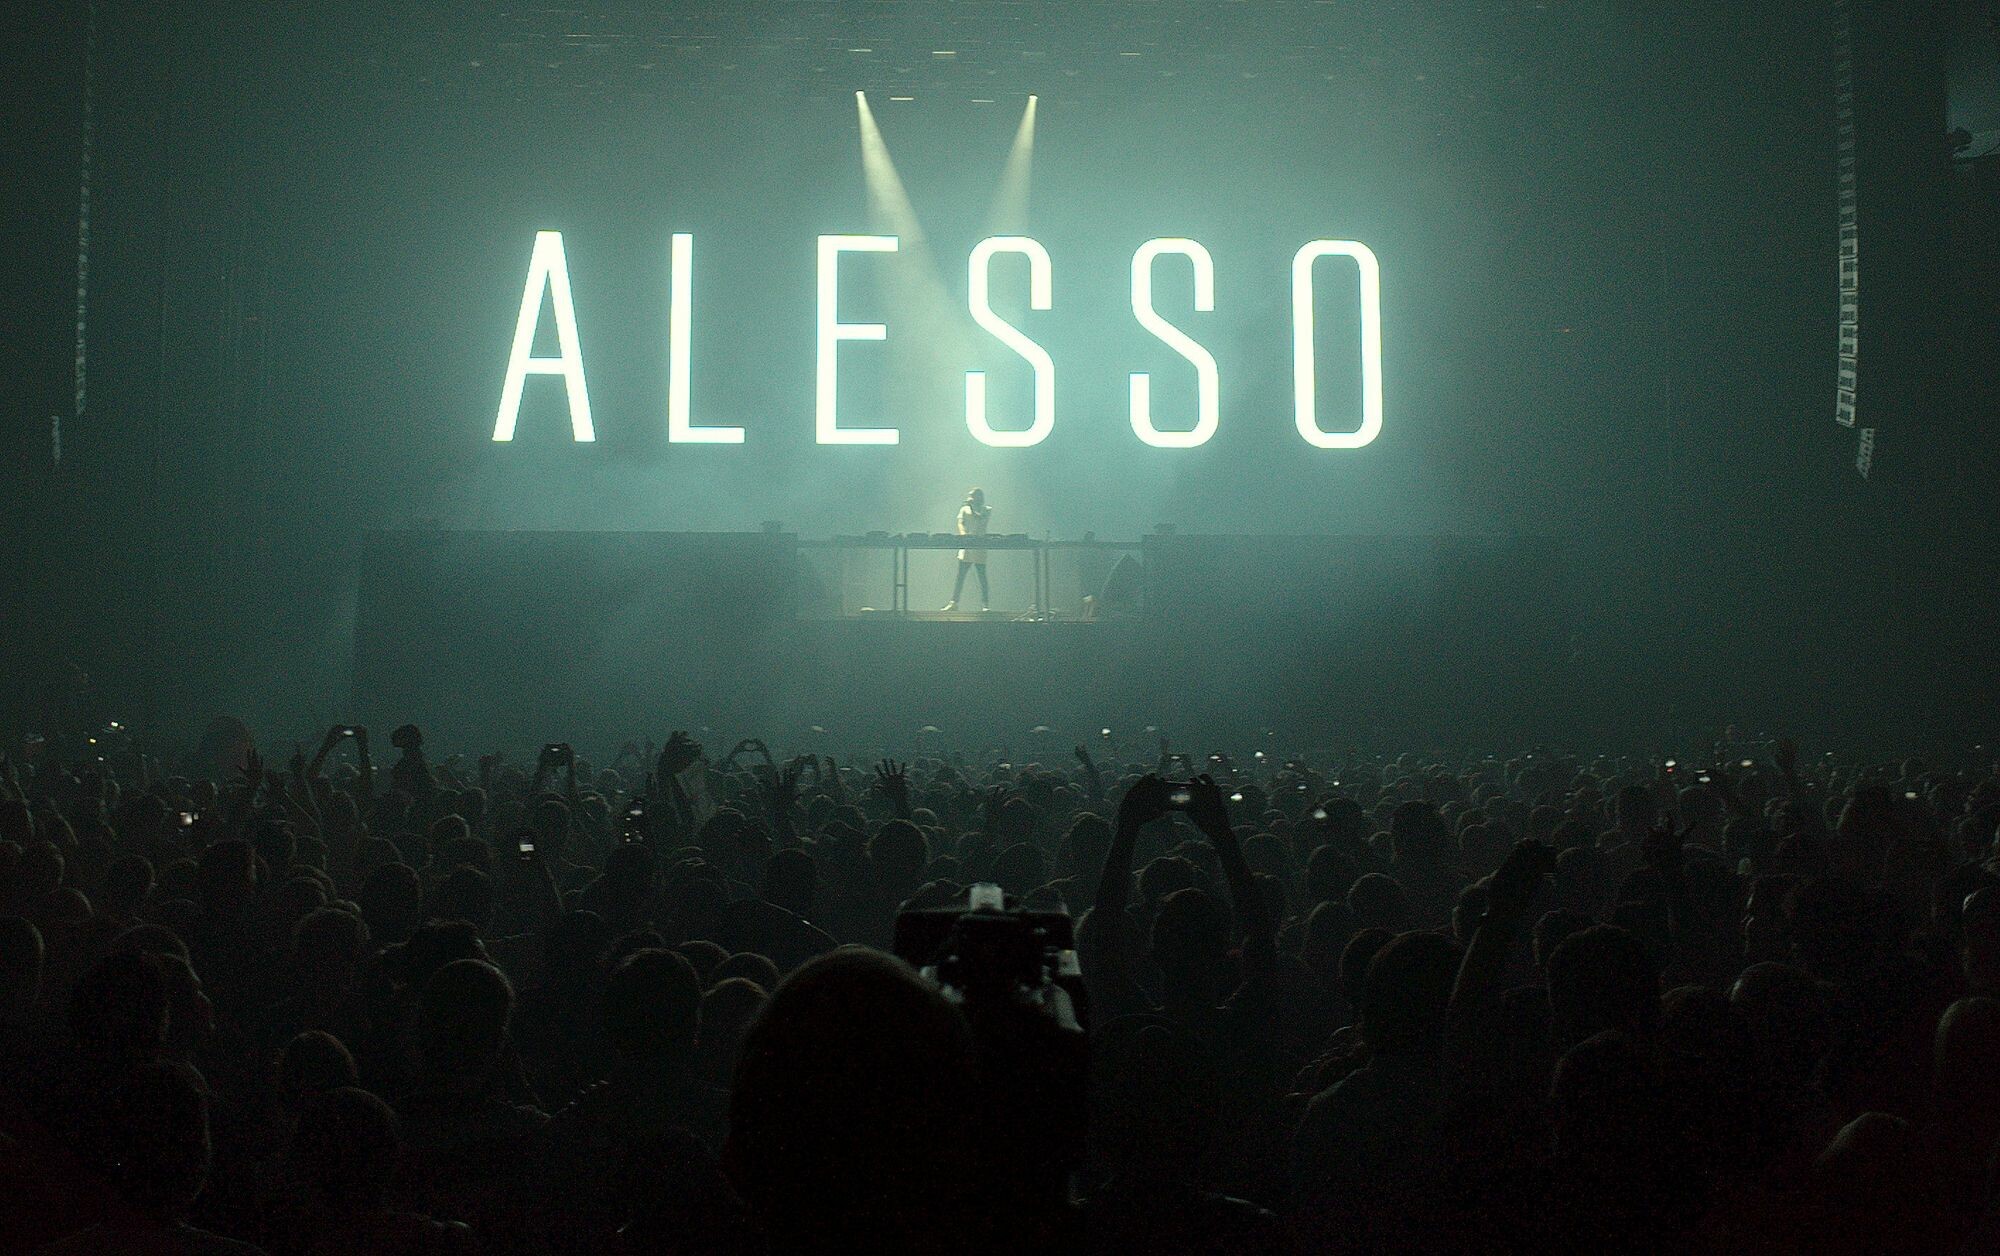 Alesso: Number 20th in year 2016 on DJ Magazine among the list of Top 100 DJs in the world. 2000x1260 HD Wallpaper.